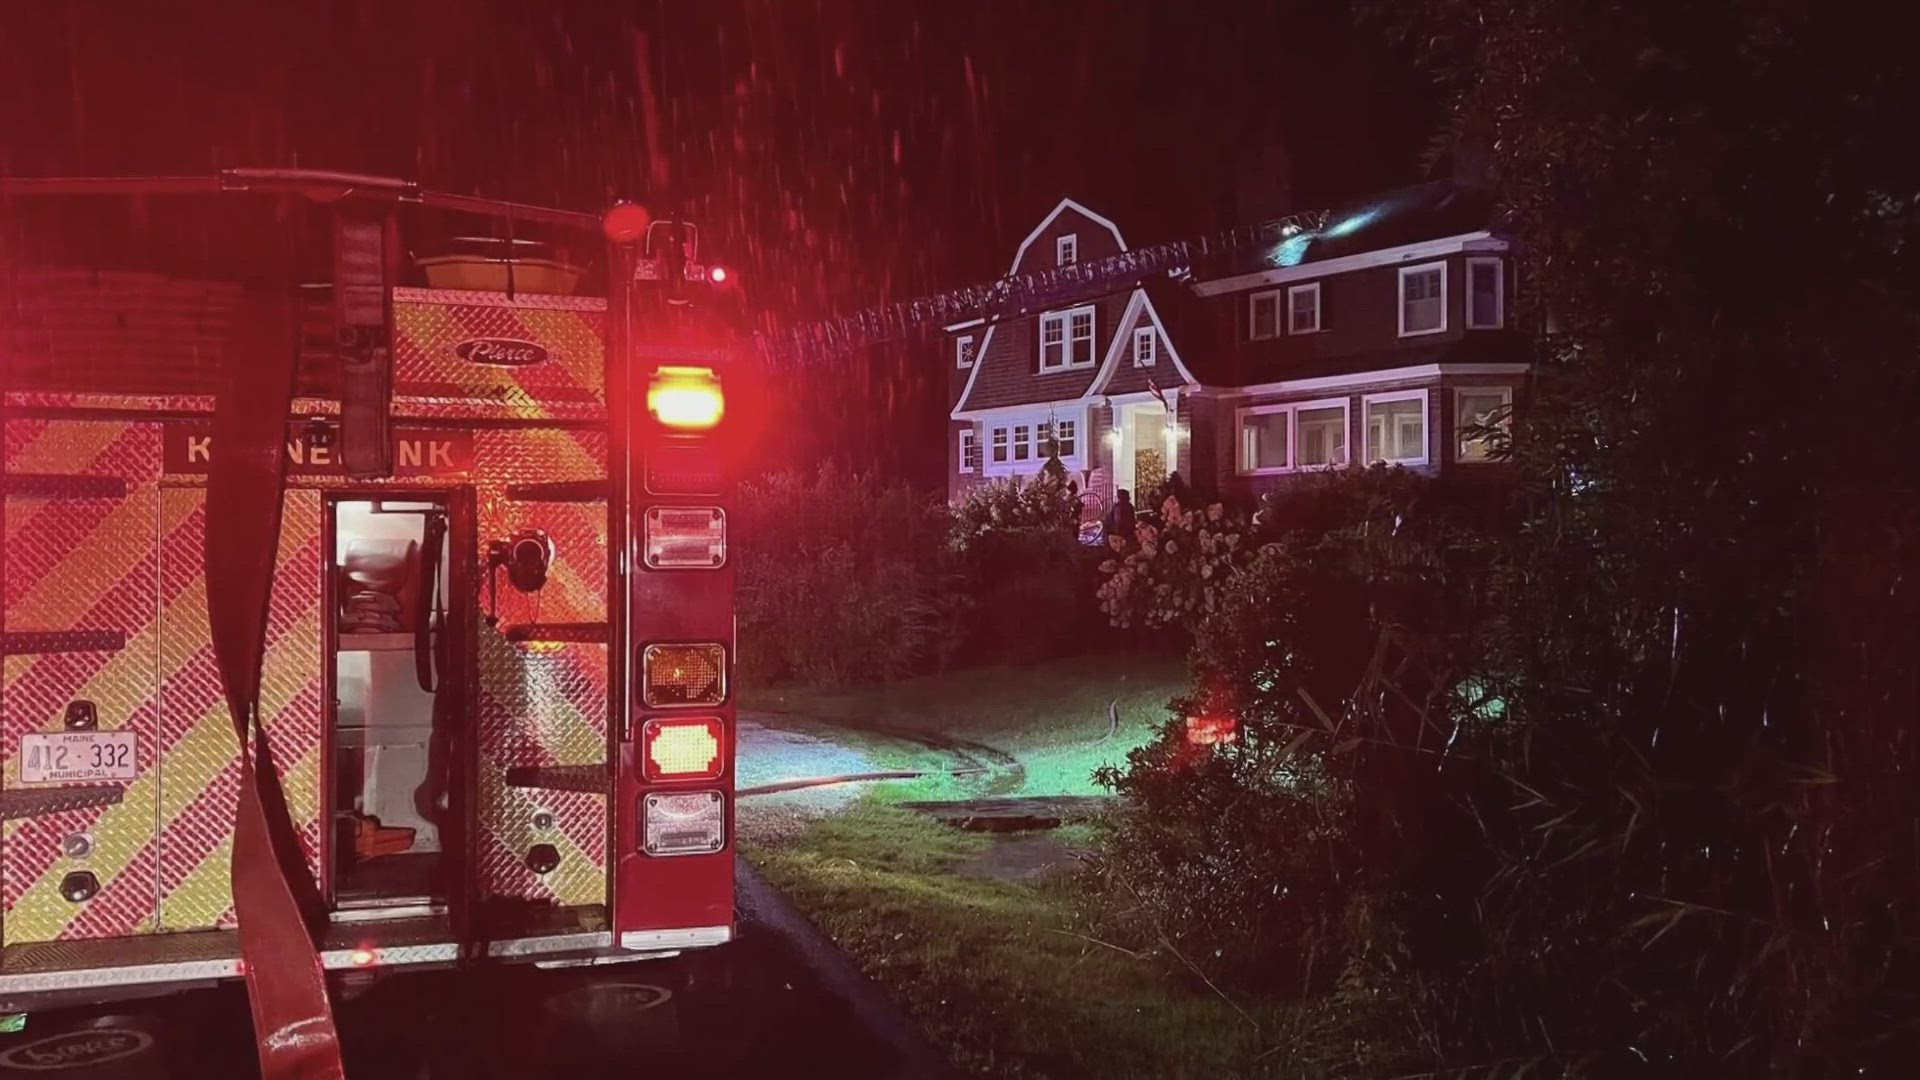 The short-term rental caught fire after hot ashes cleaned from a fireplace were placed into a flammable container, causing the container to then ignite.